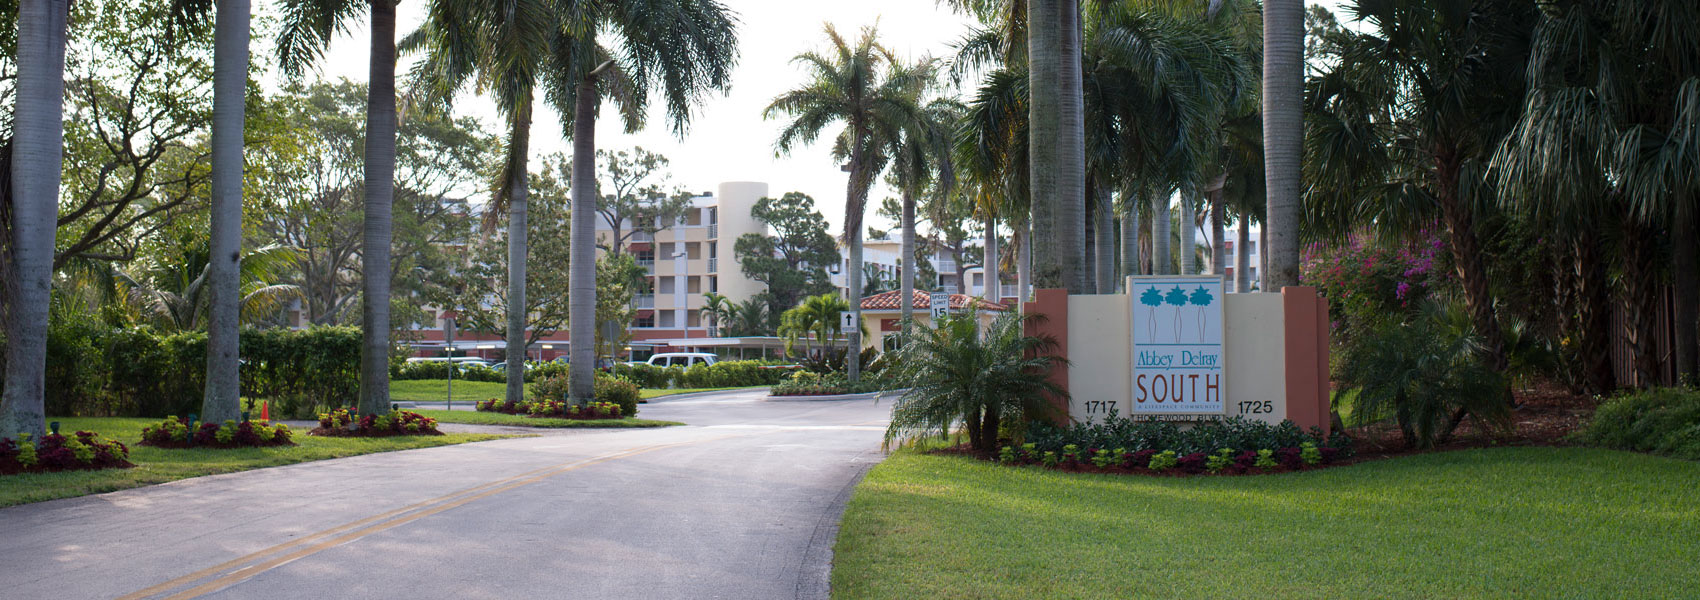 Sign to the entrance of Abbey Delray South a retirement community in Delray Beach Florida